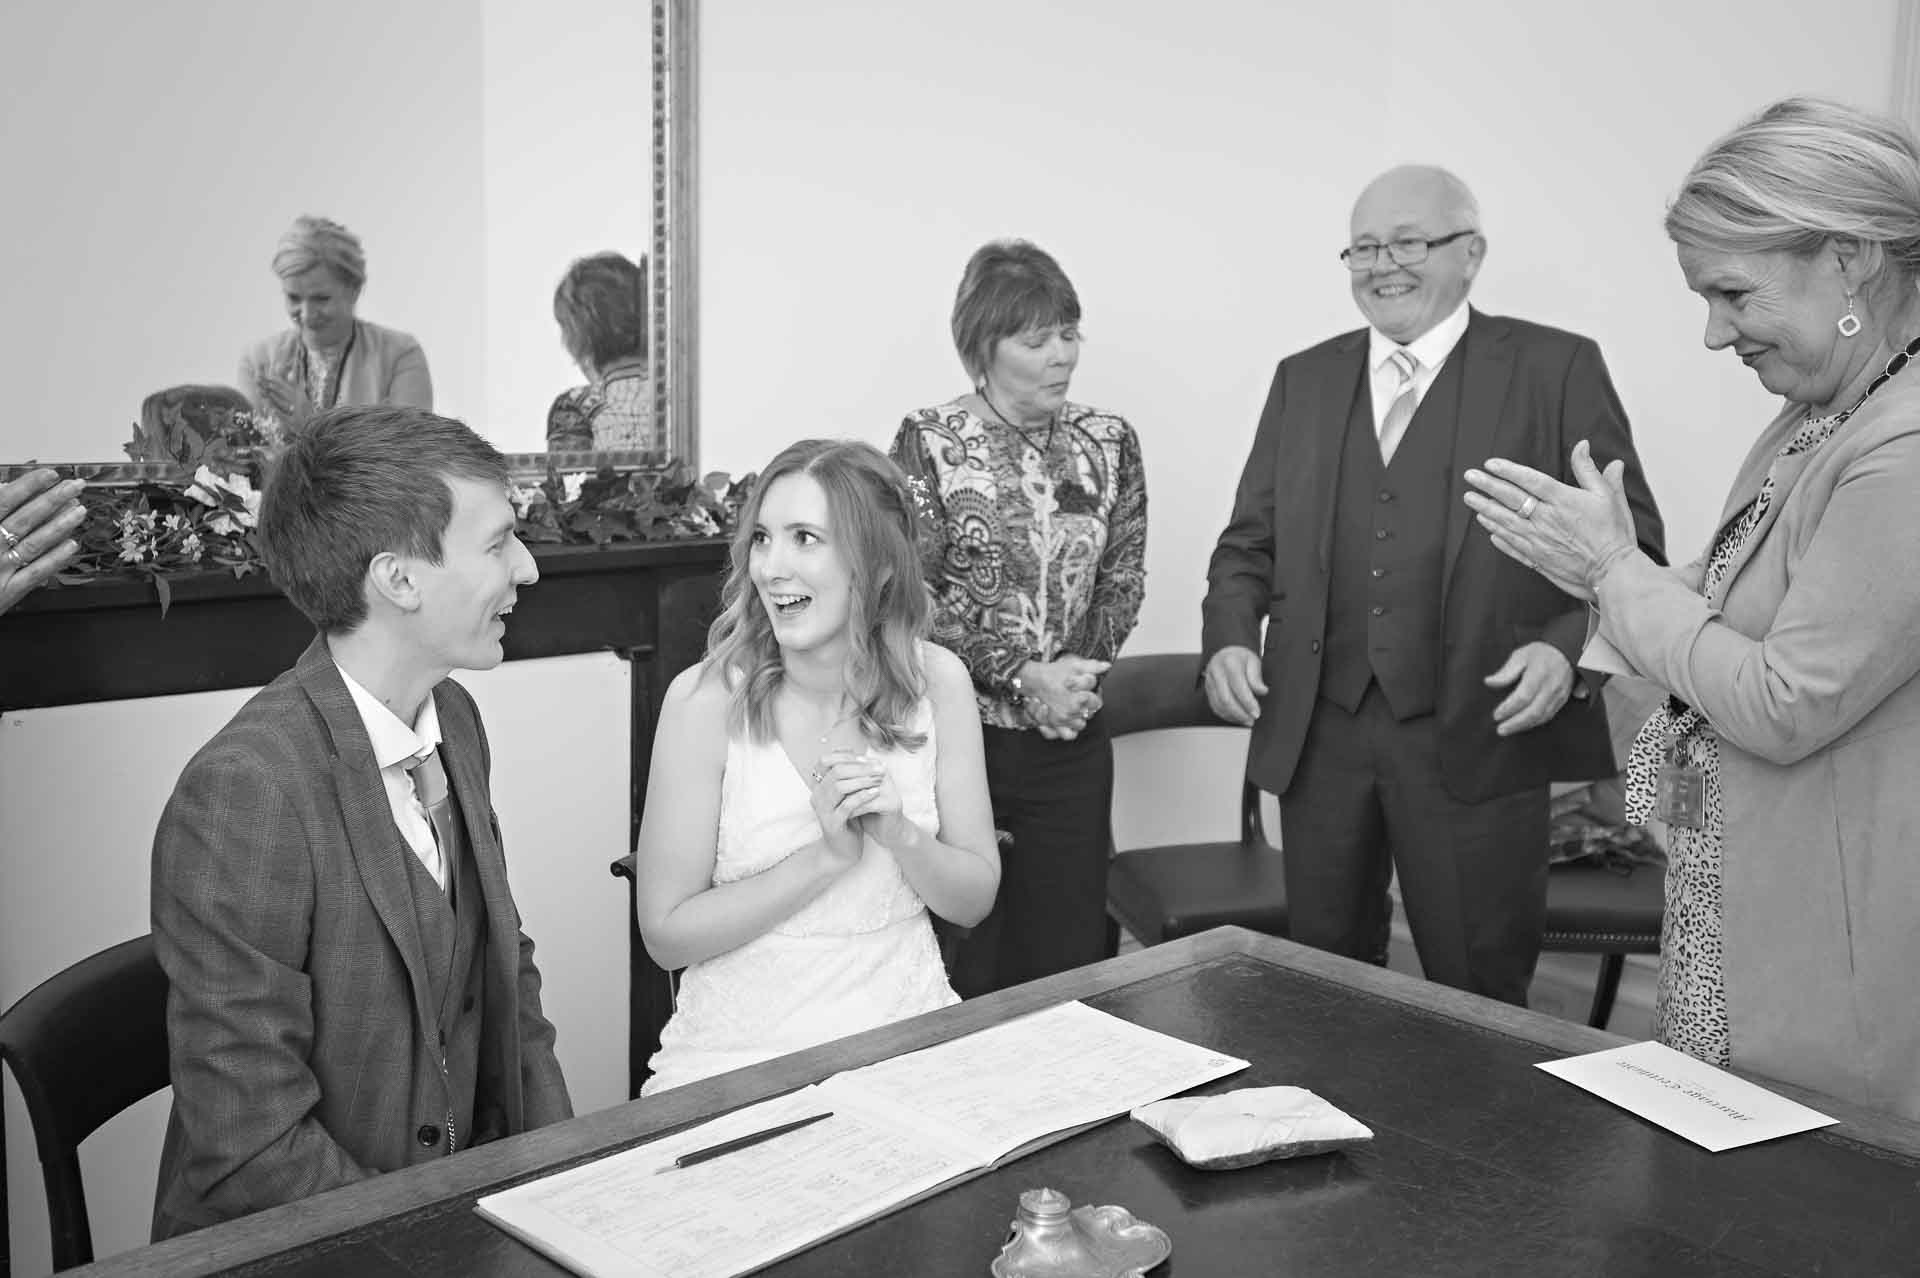 Newly-weds chatting whilst being applauded after wedding register signing in Bristol